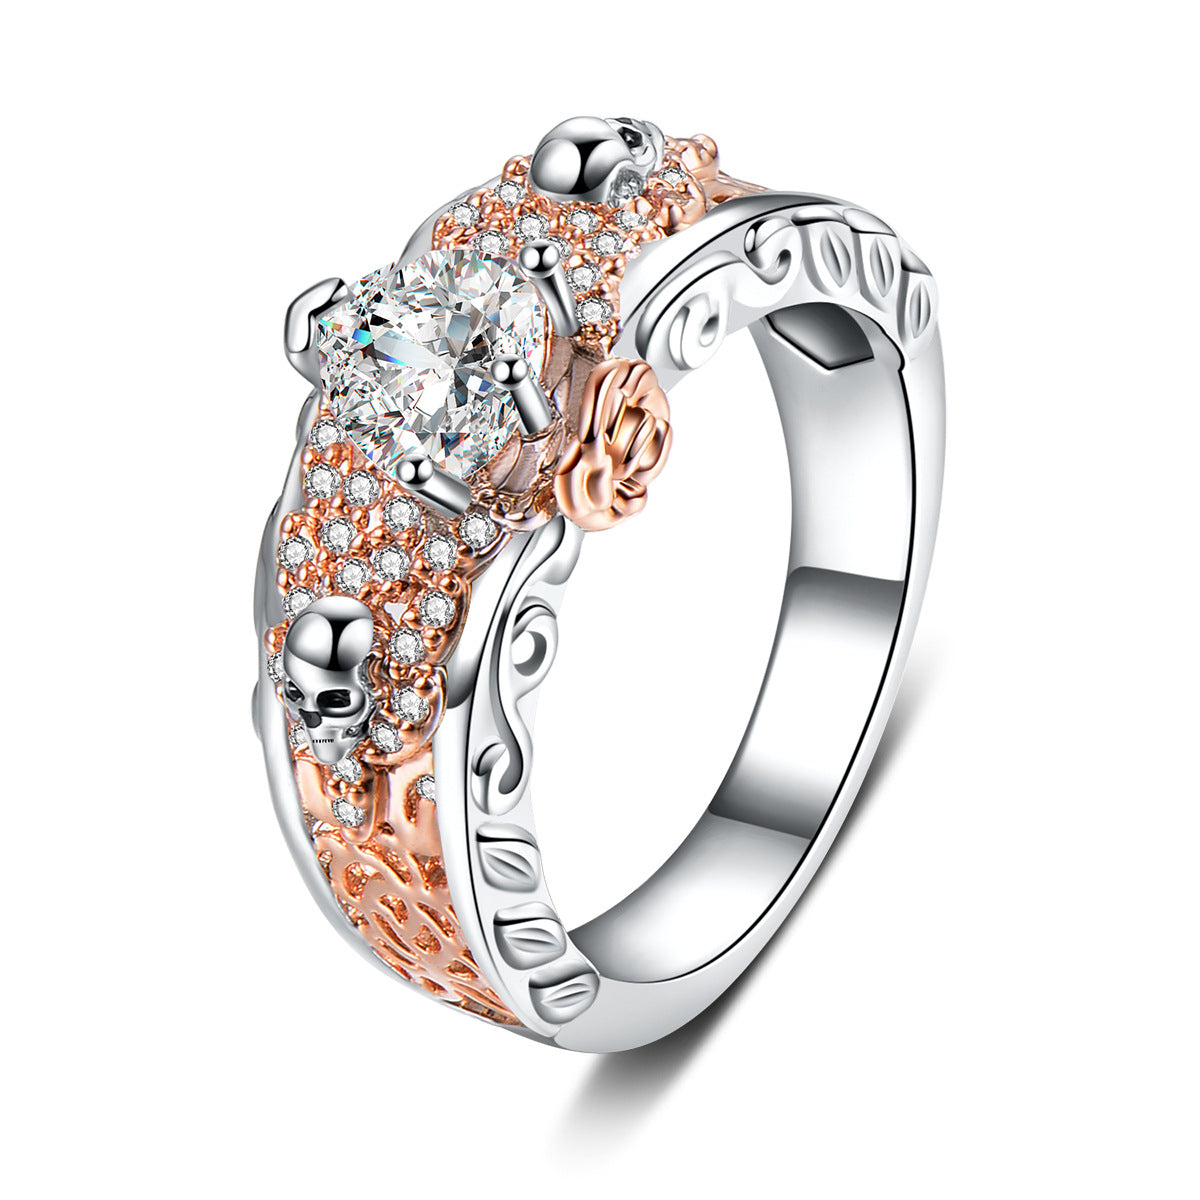 A Maramalive™ Women's Skull Ring with a diamond in the center.